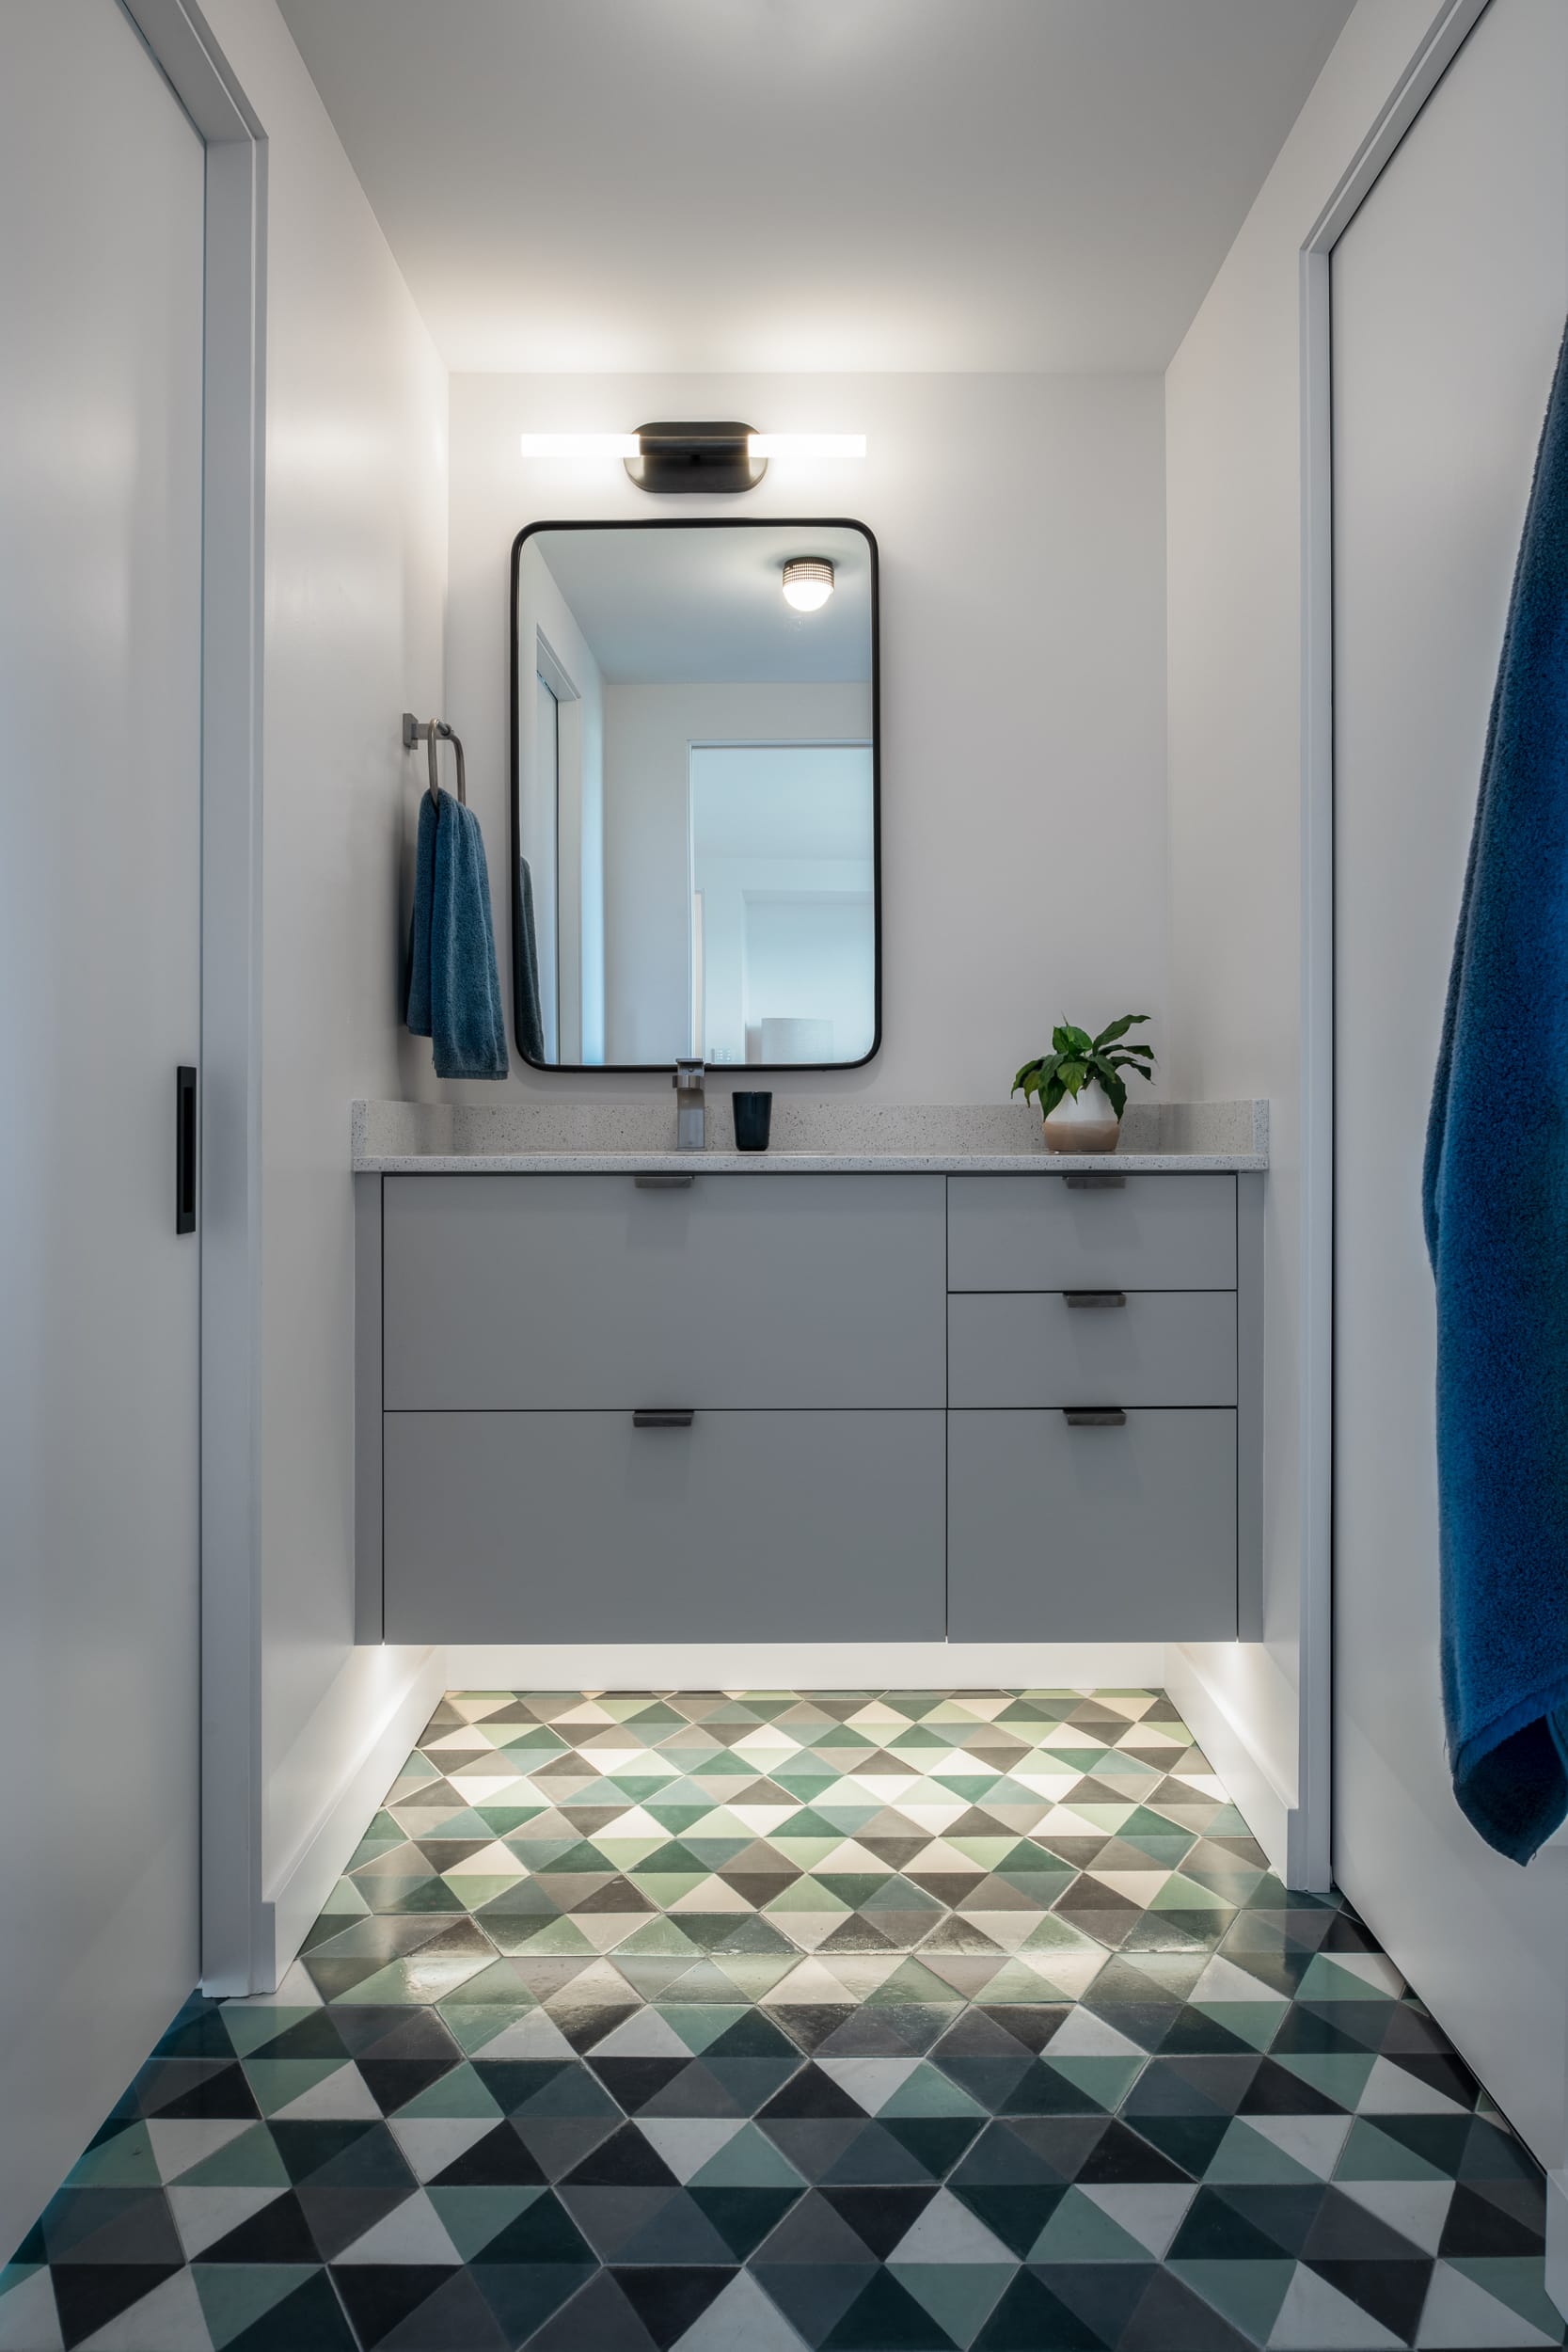 A bathroom with a green and blue tiled floor.